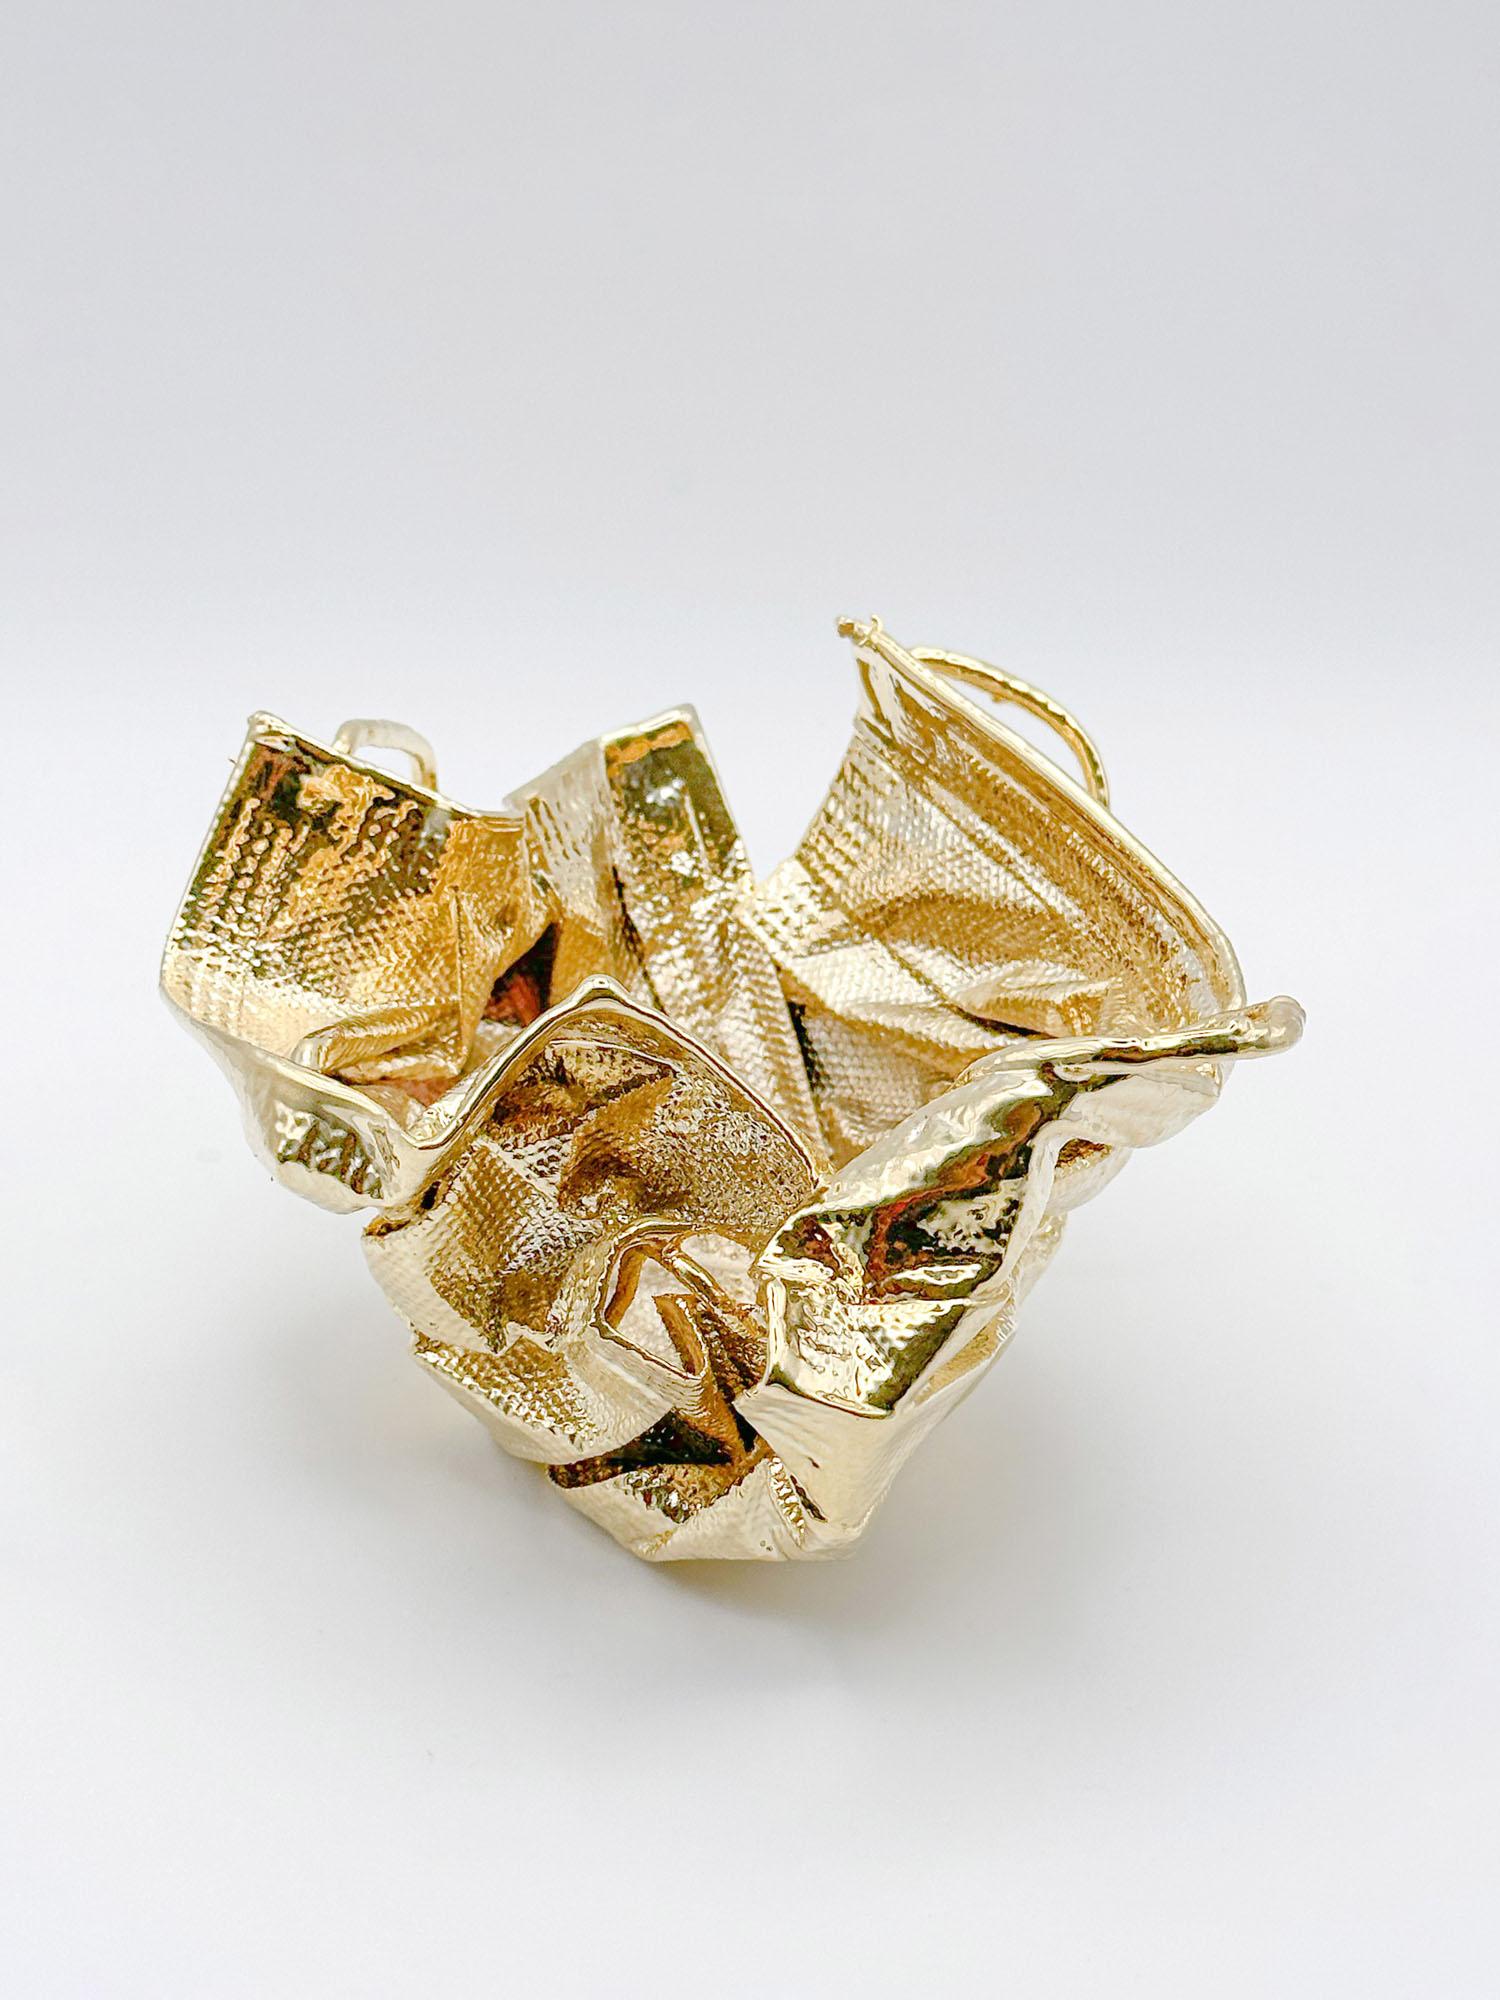 Post-Modern Remask Act 009 Gold Art Object Made from Surgical Mask by Enrico Girotti For Sale